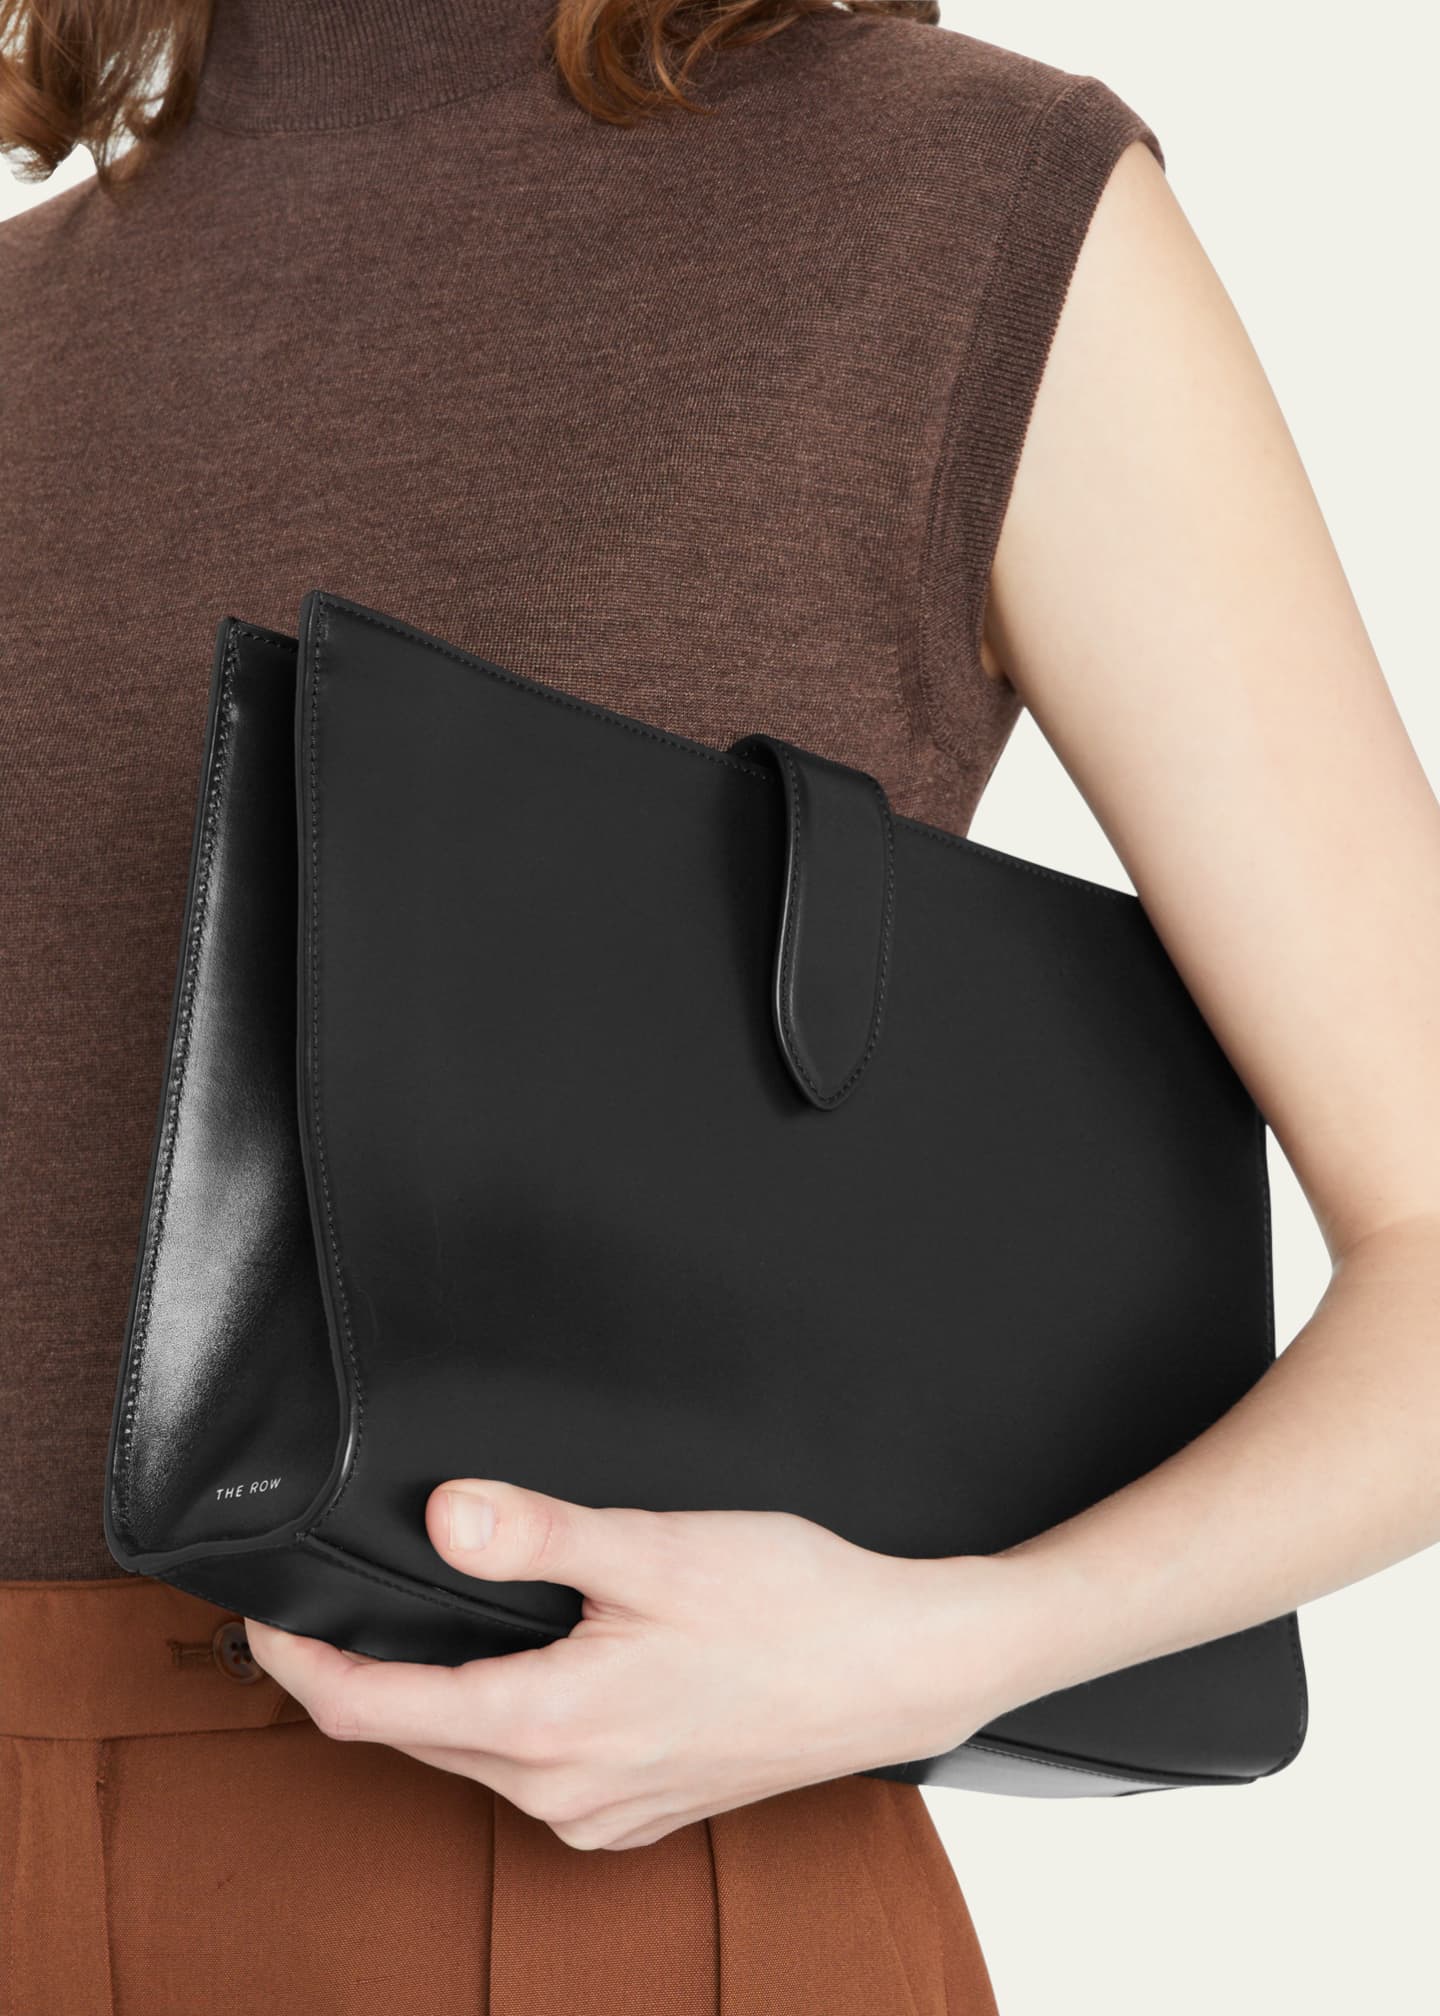 THE ROW Vera Portfolio Flap Clutch Bag in Calf Leather Image 2 of 5